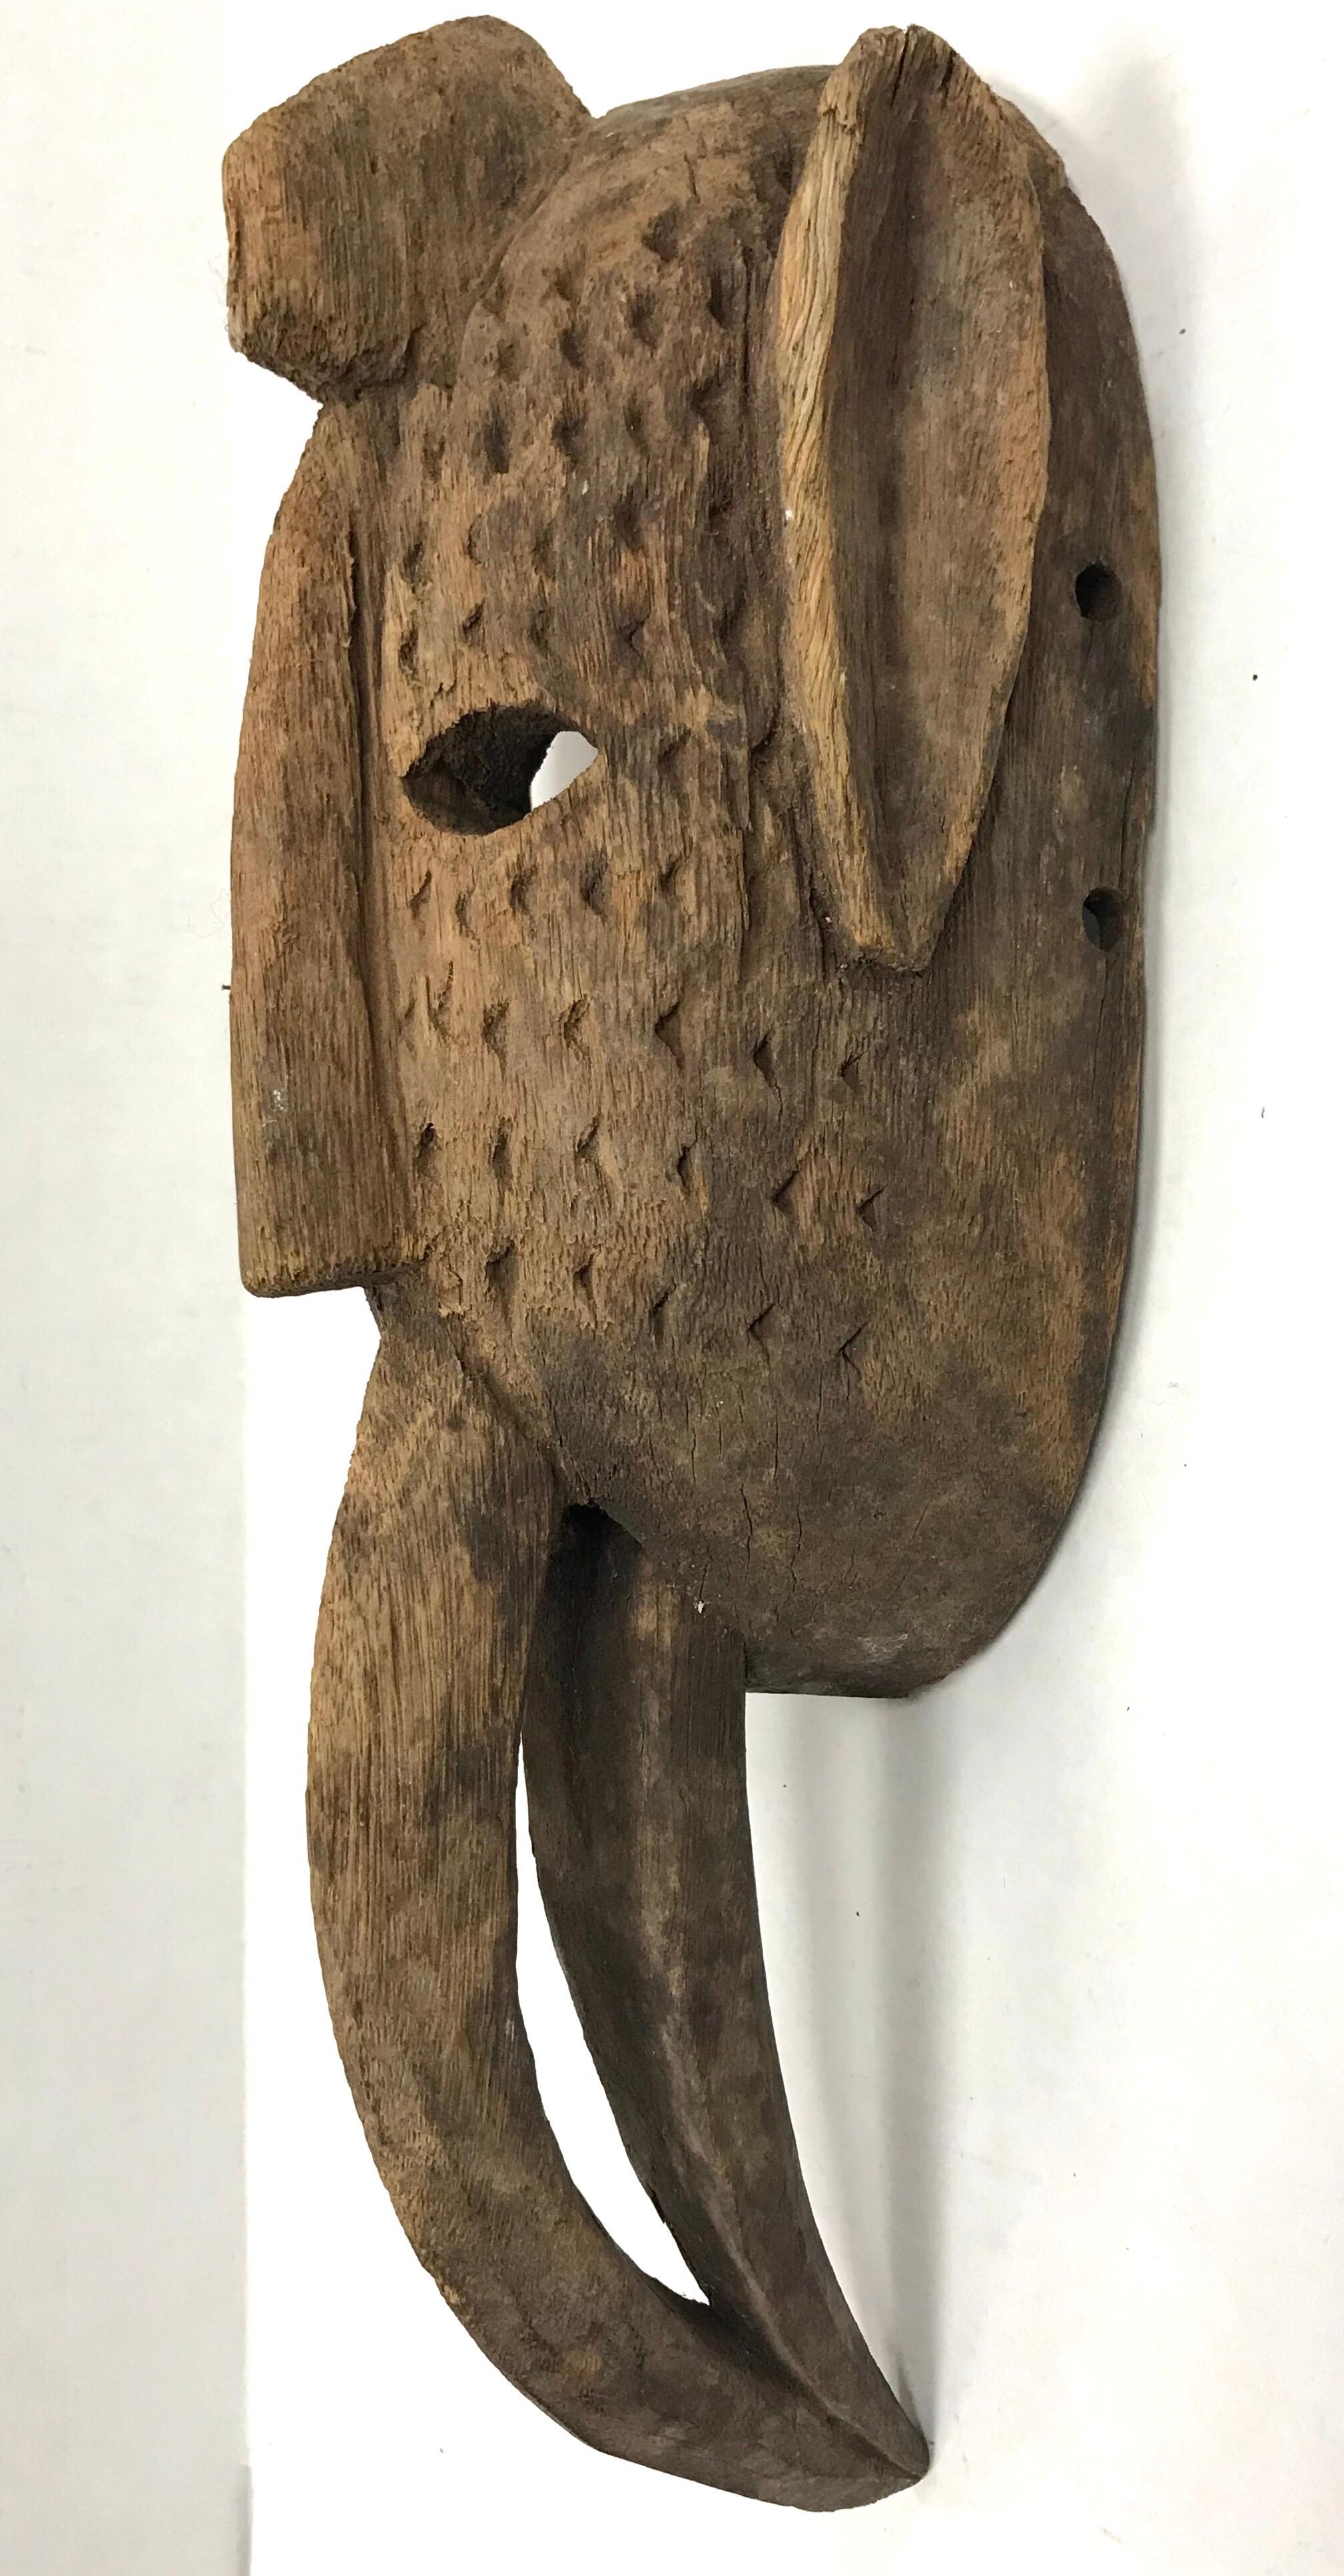 Magnificent Ghana, Africa carved Primitive tribal mask hanging sculpture. All original and part of a collector's collection of rarer pieces from the middle of the 20th century.